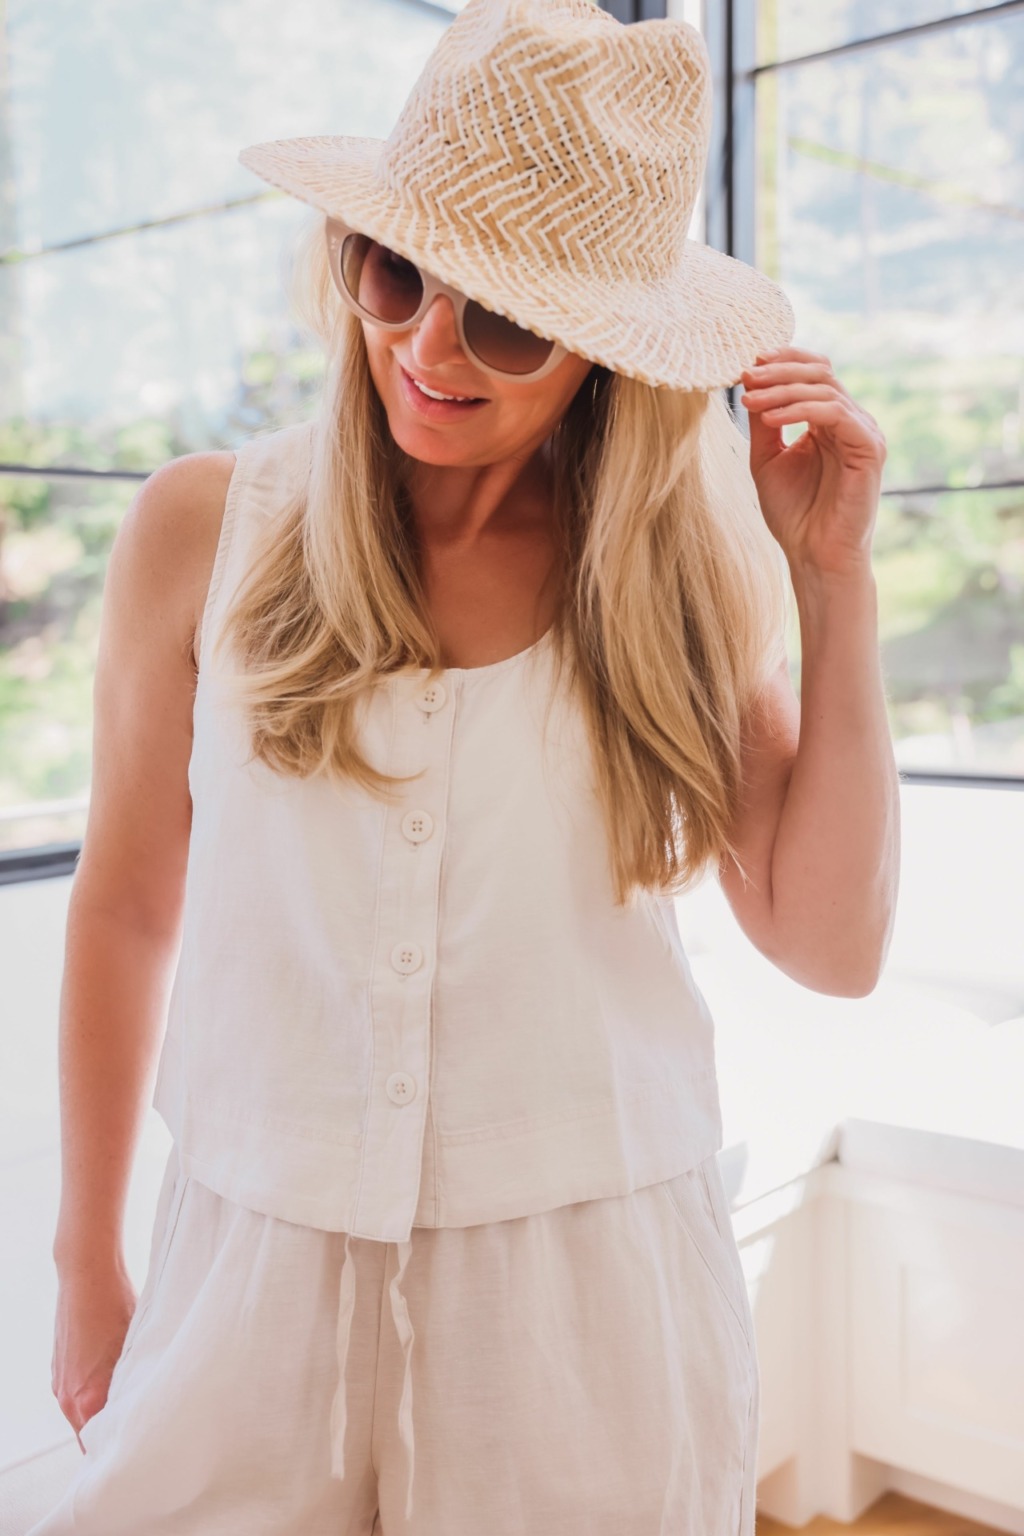 7 Easy Breezy Labor Day Outfits - Elevate Your Style Game on Labor Day